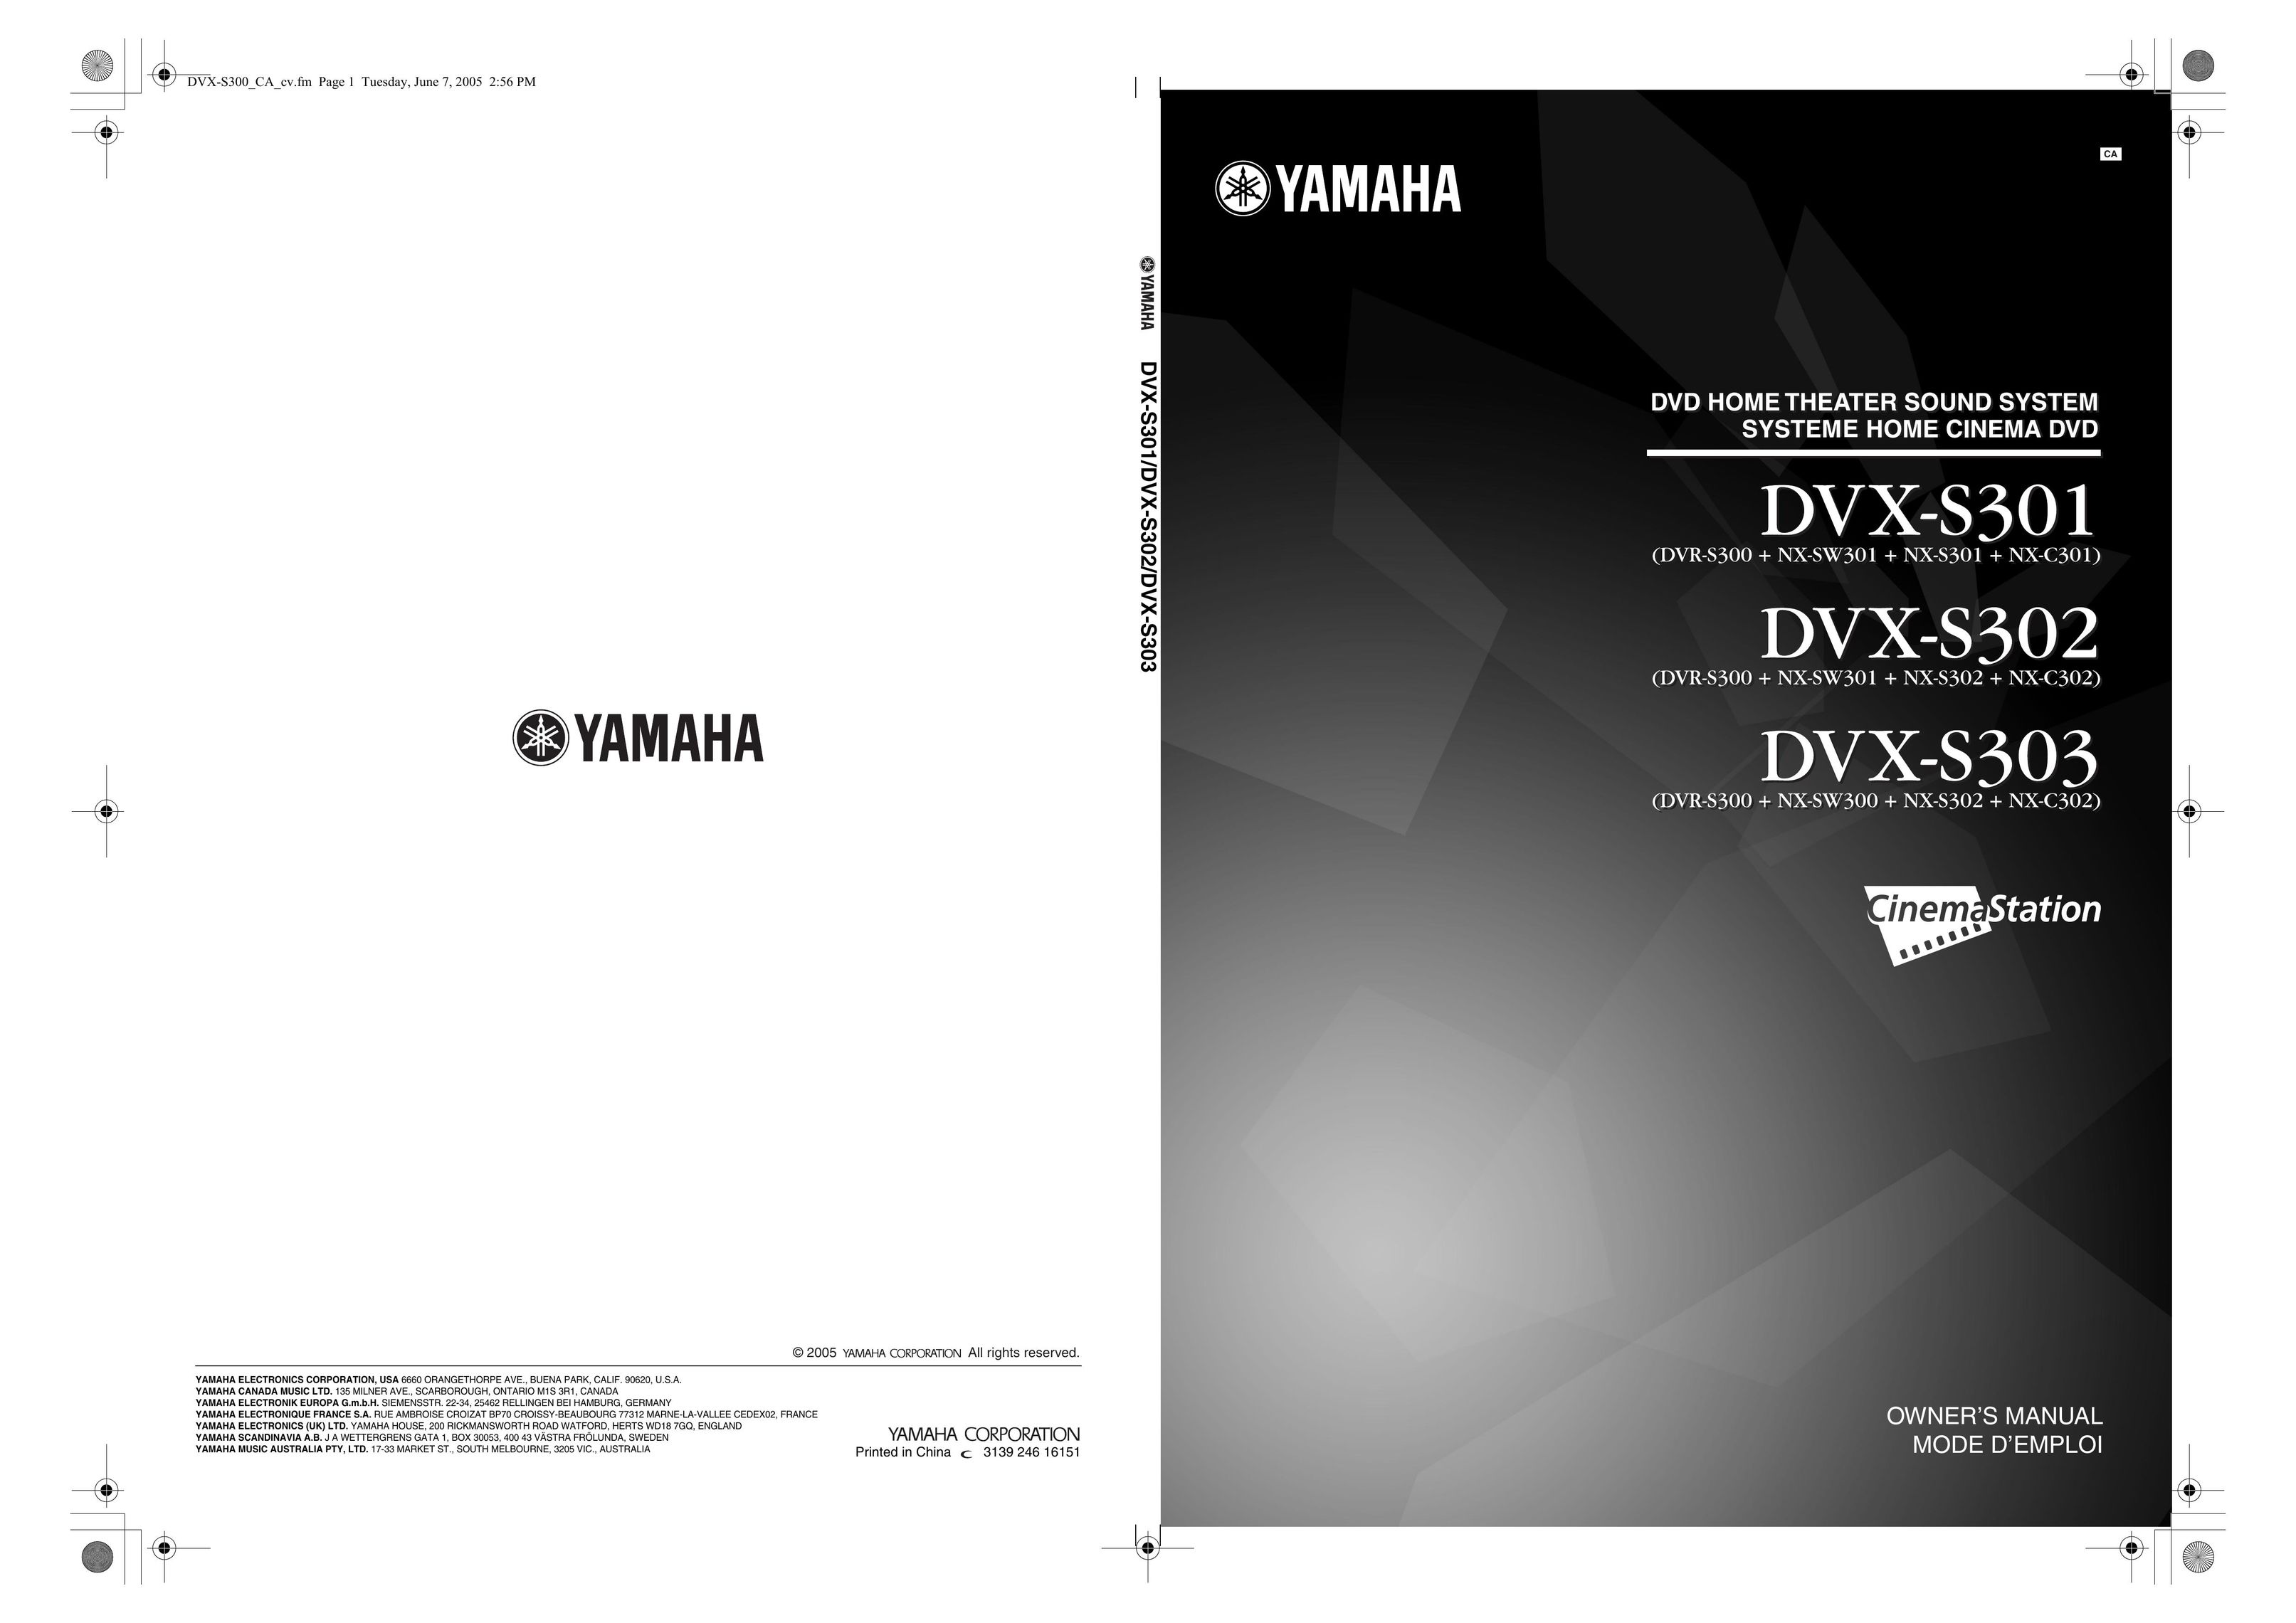 Yamaha DVX-S301 Home Theater System User Manual